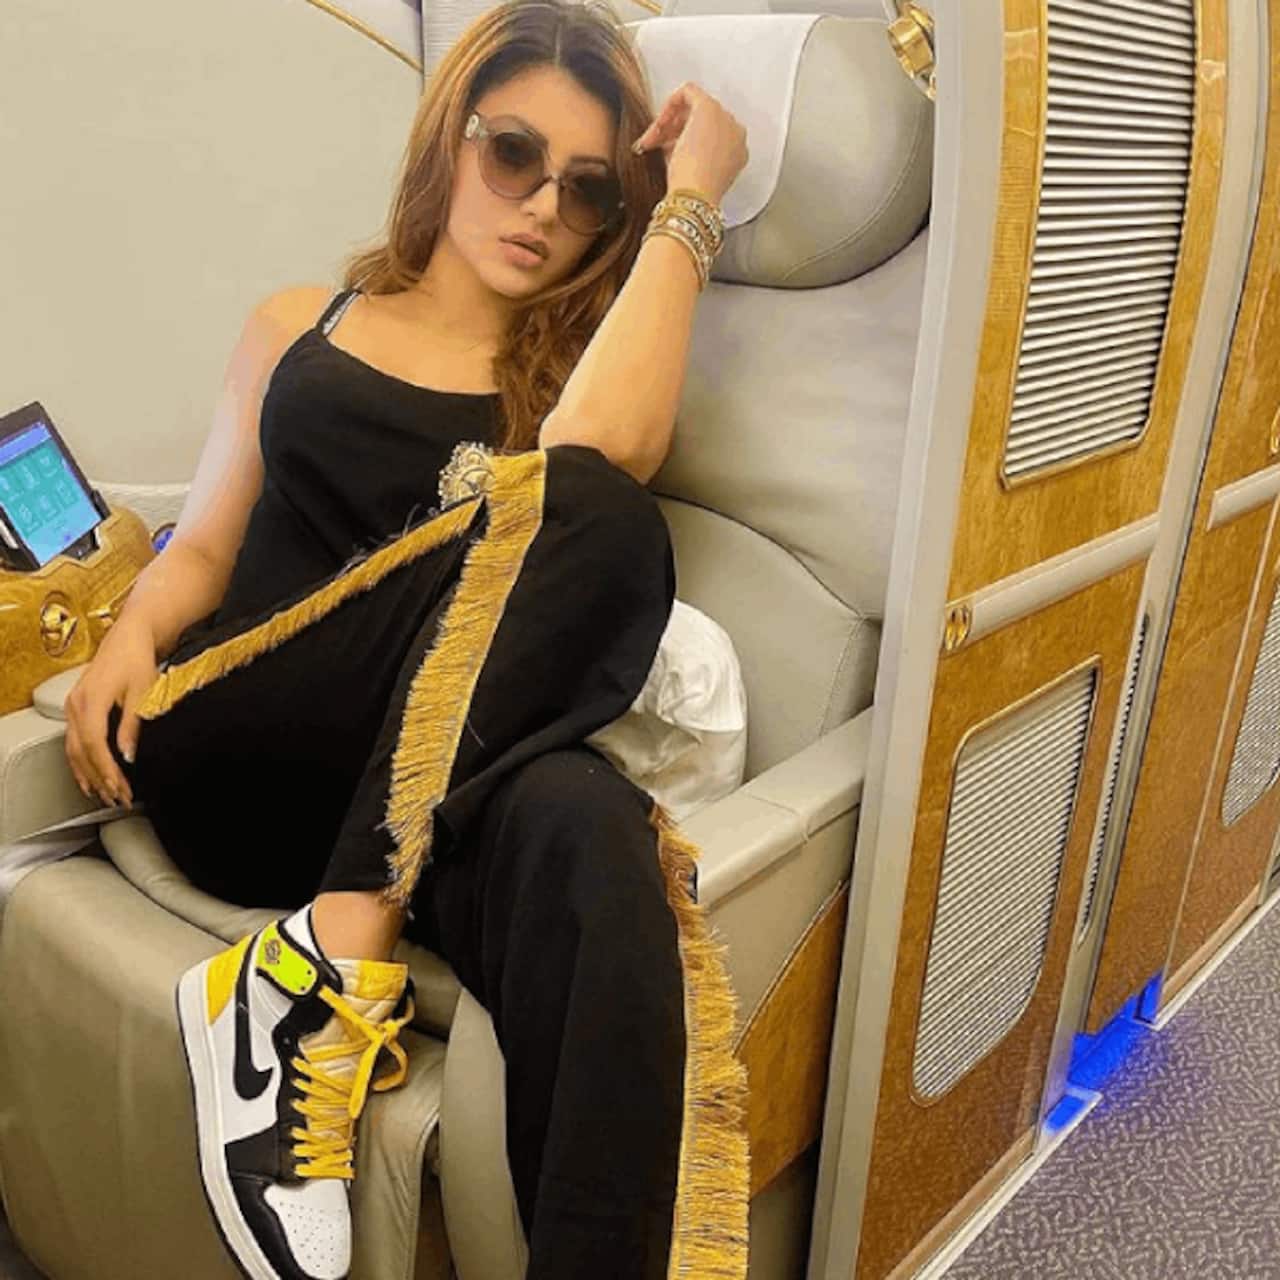 T20 World Cup: Urvashi Rautela-Rishabh Pant's ex-relationship once again gains footage as she reaches Australia; Twitter erupts with hilarious memes [VIEW TWEETS]